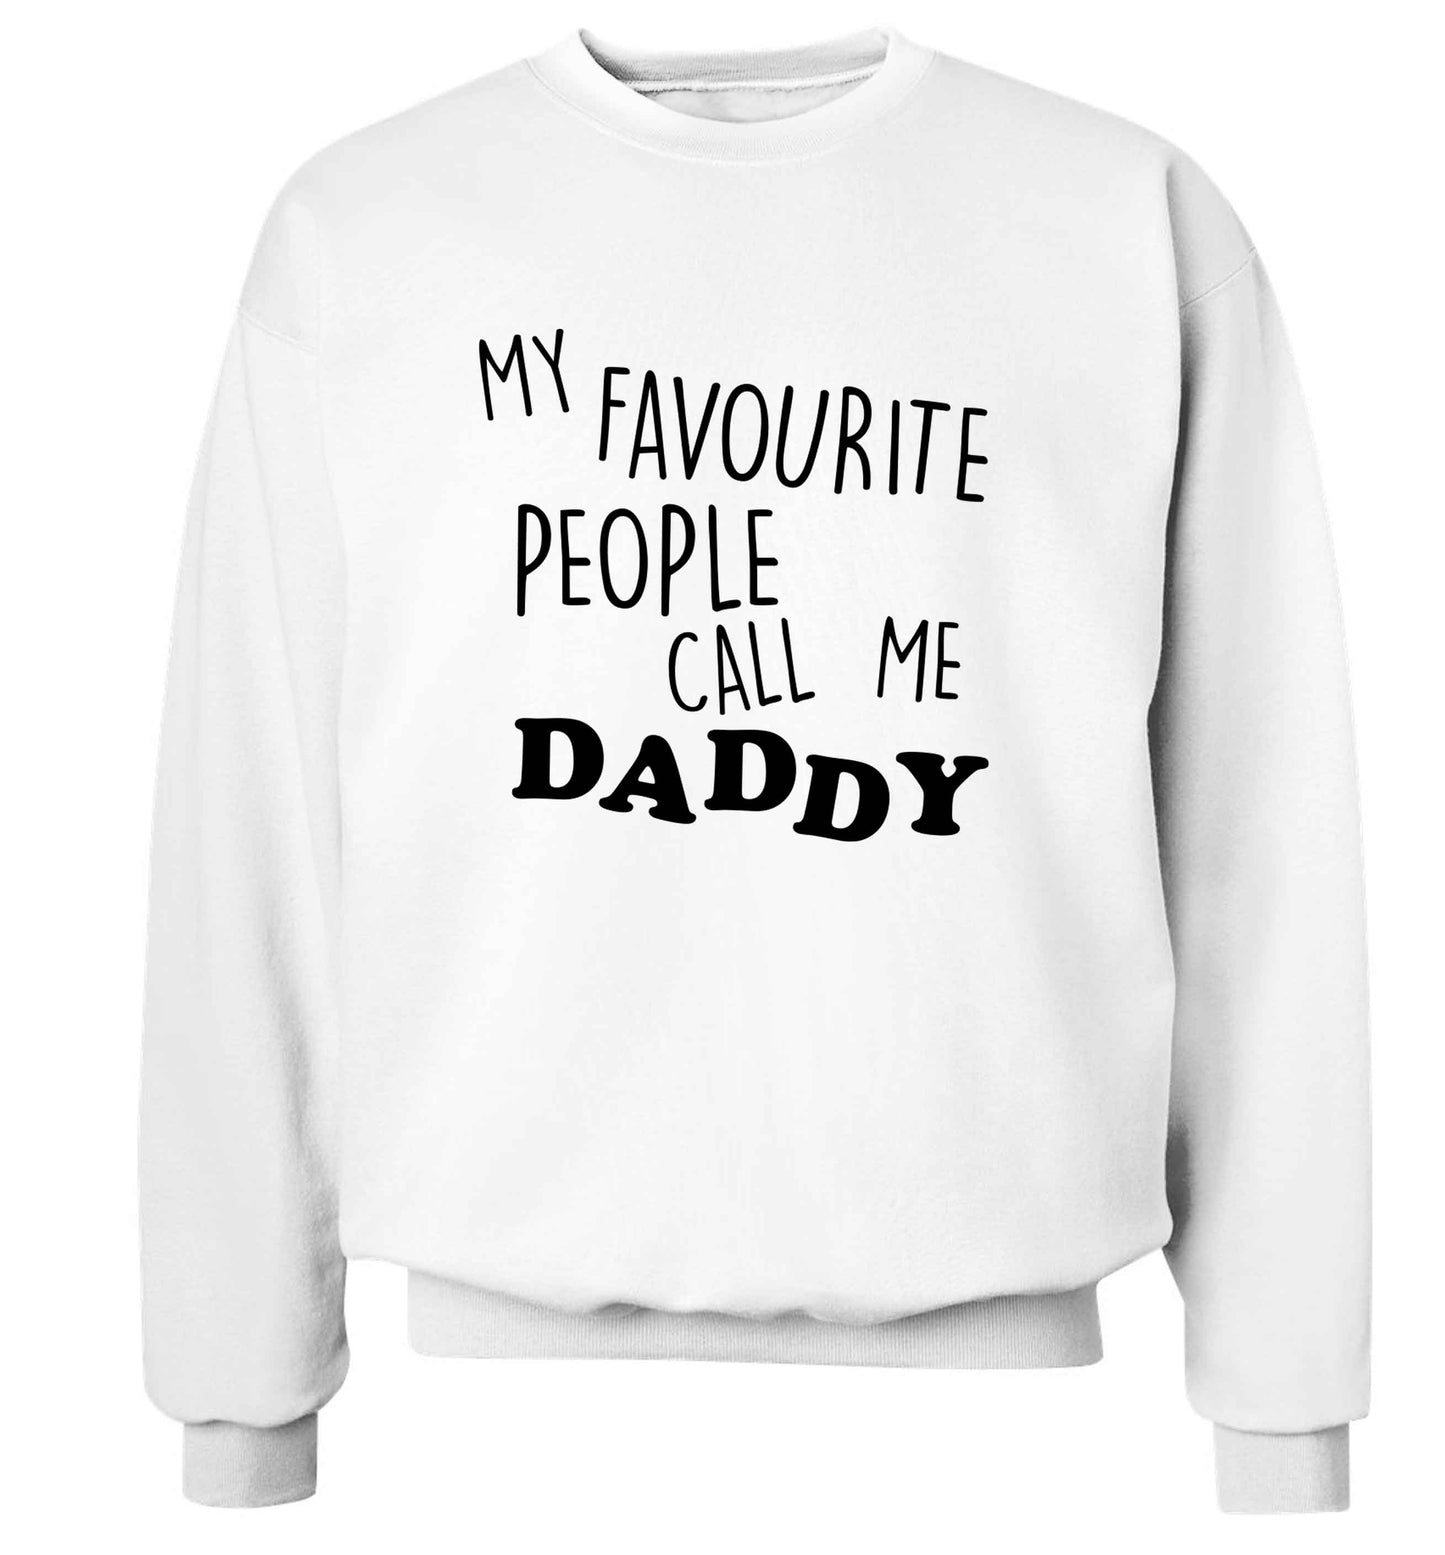 My favourite people call me daddy adult's unisex white sweater 2XL